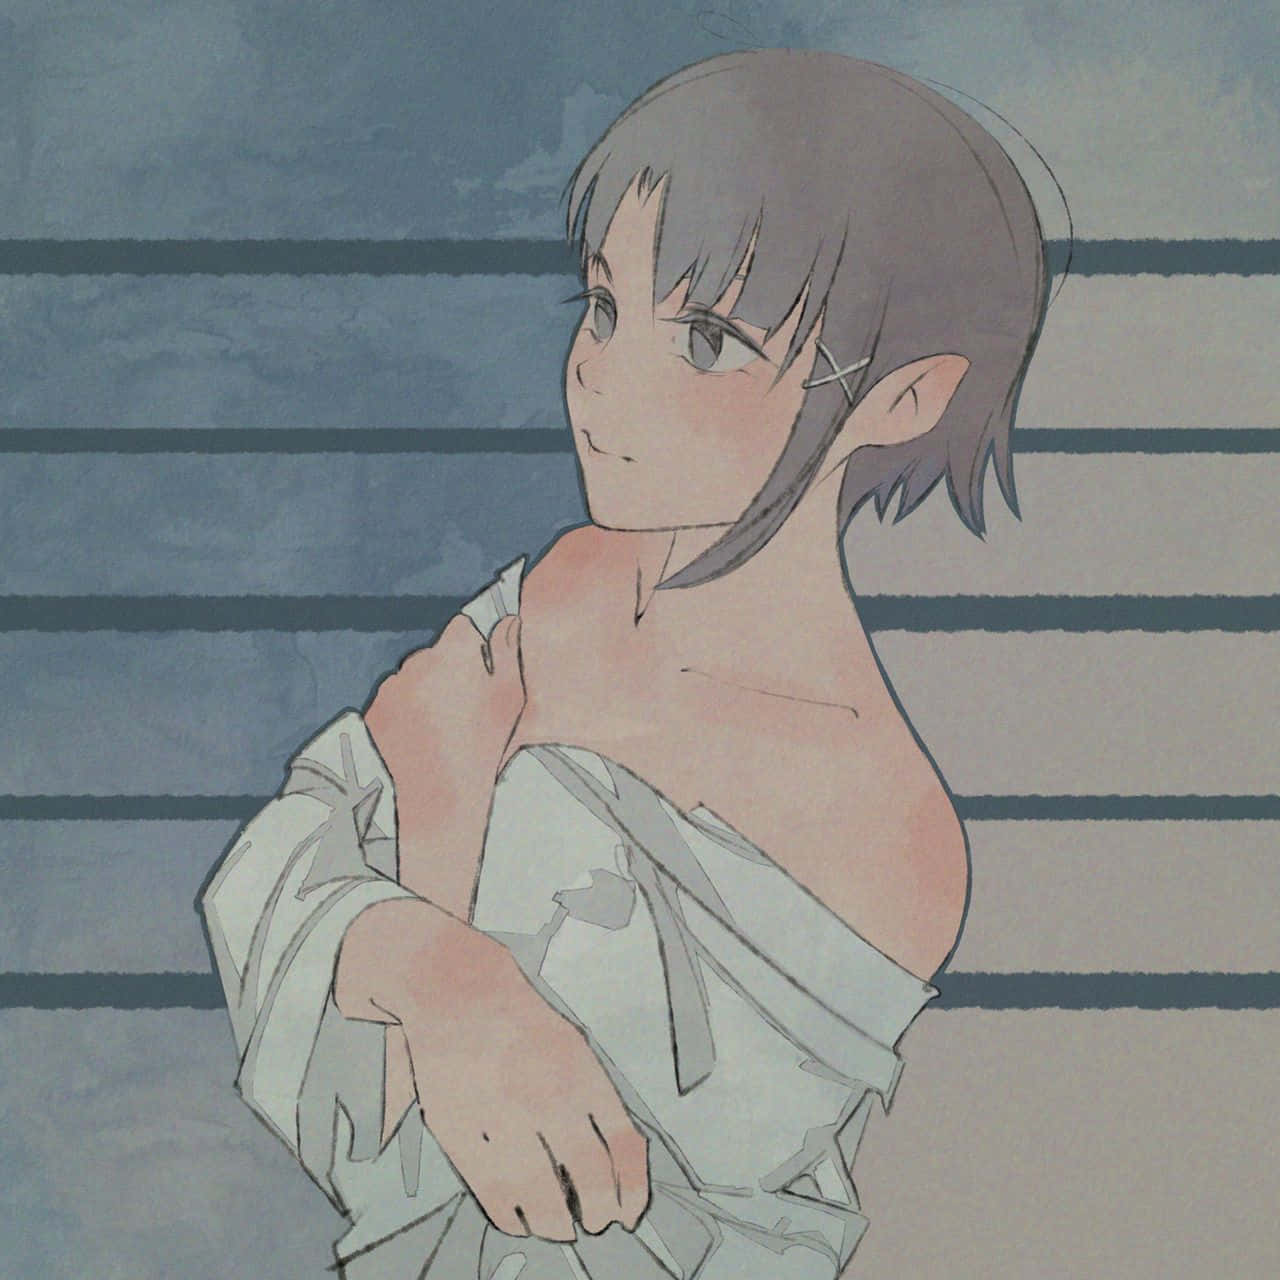 Serial Experiments Lain, An Anime Based On The Concept Of Cyber-existence Background